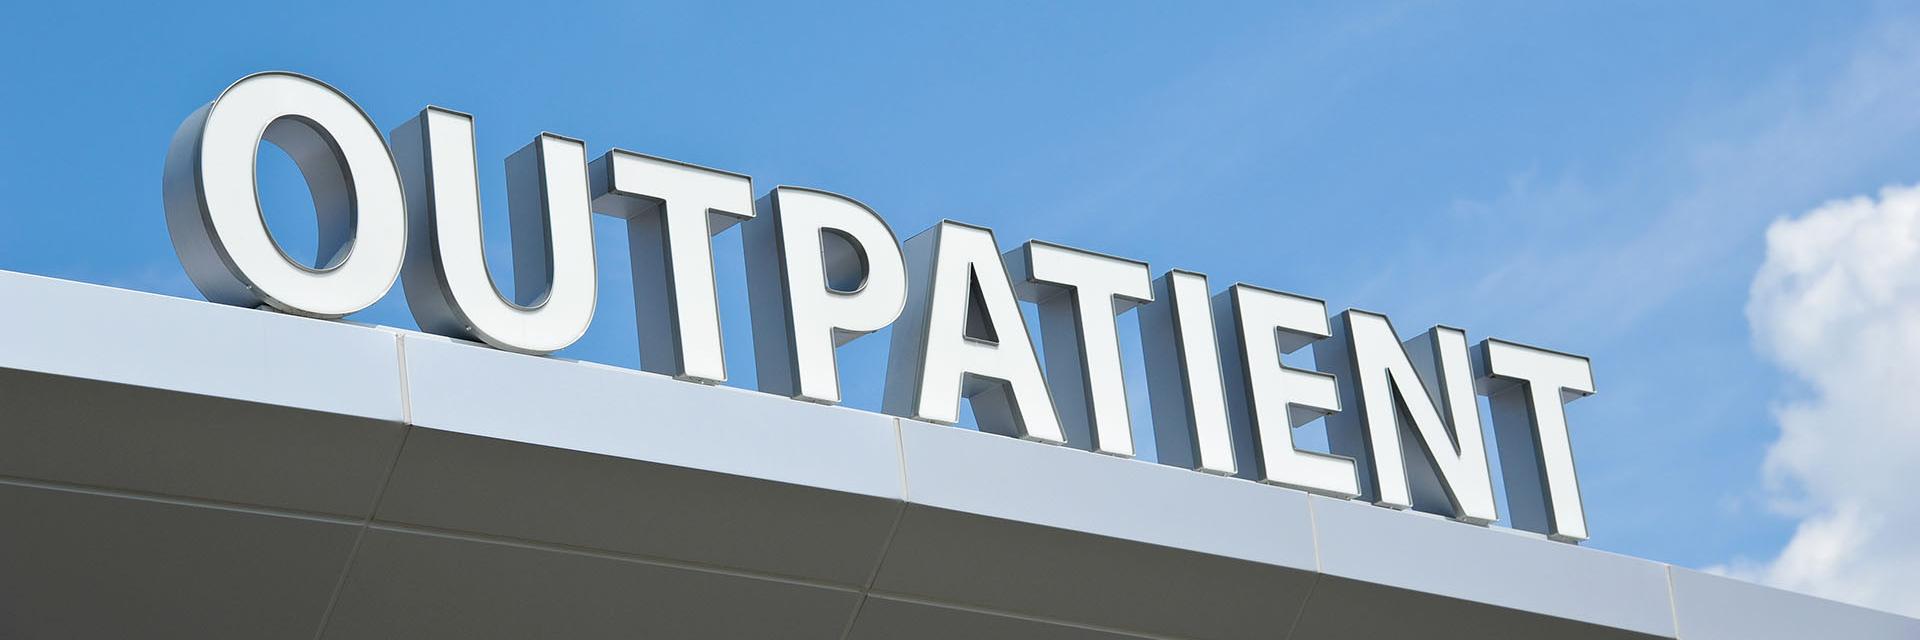 Outpatient sign on a building